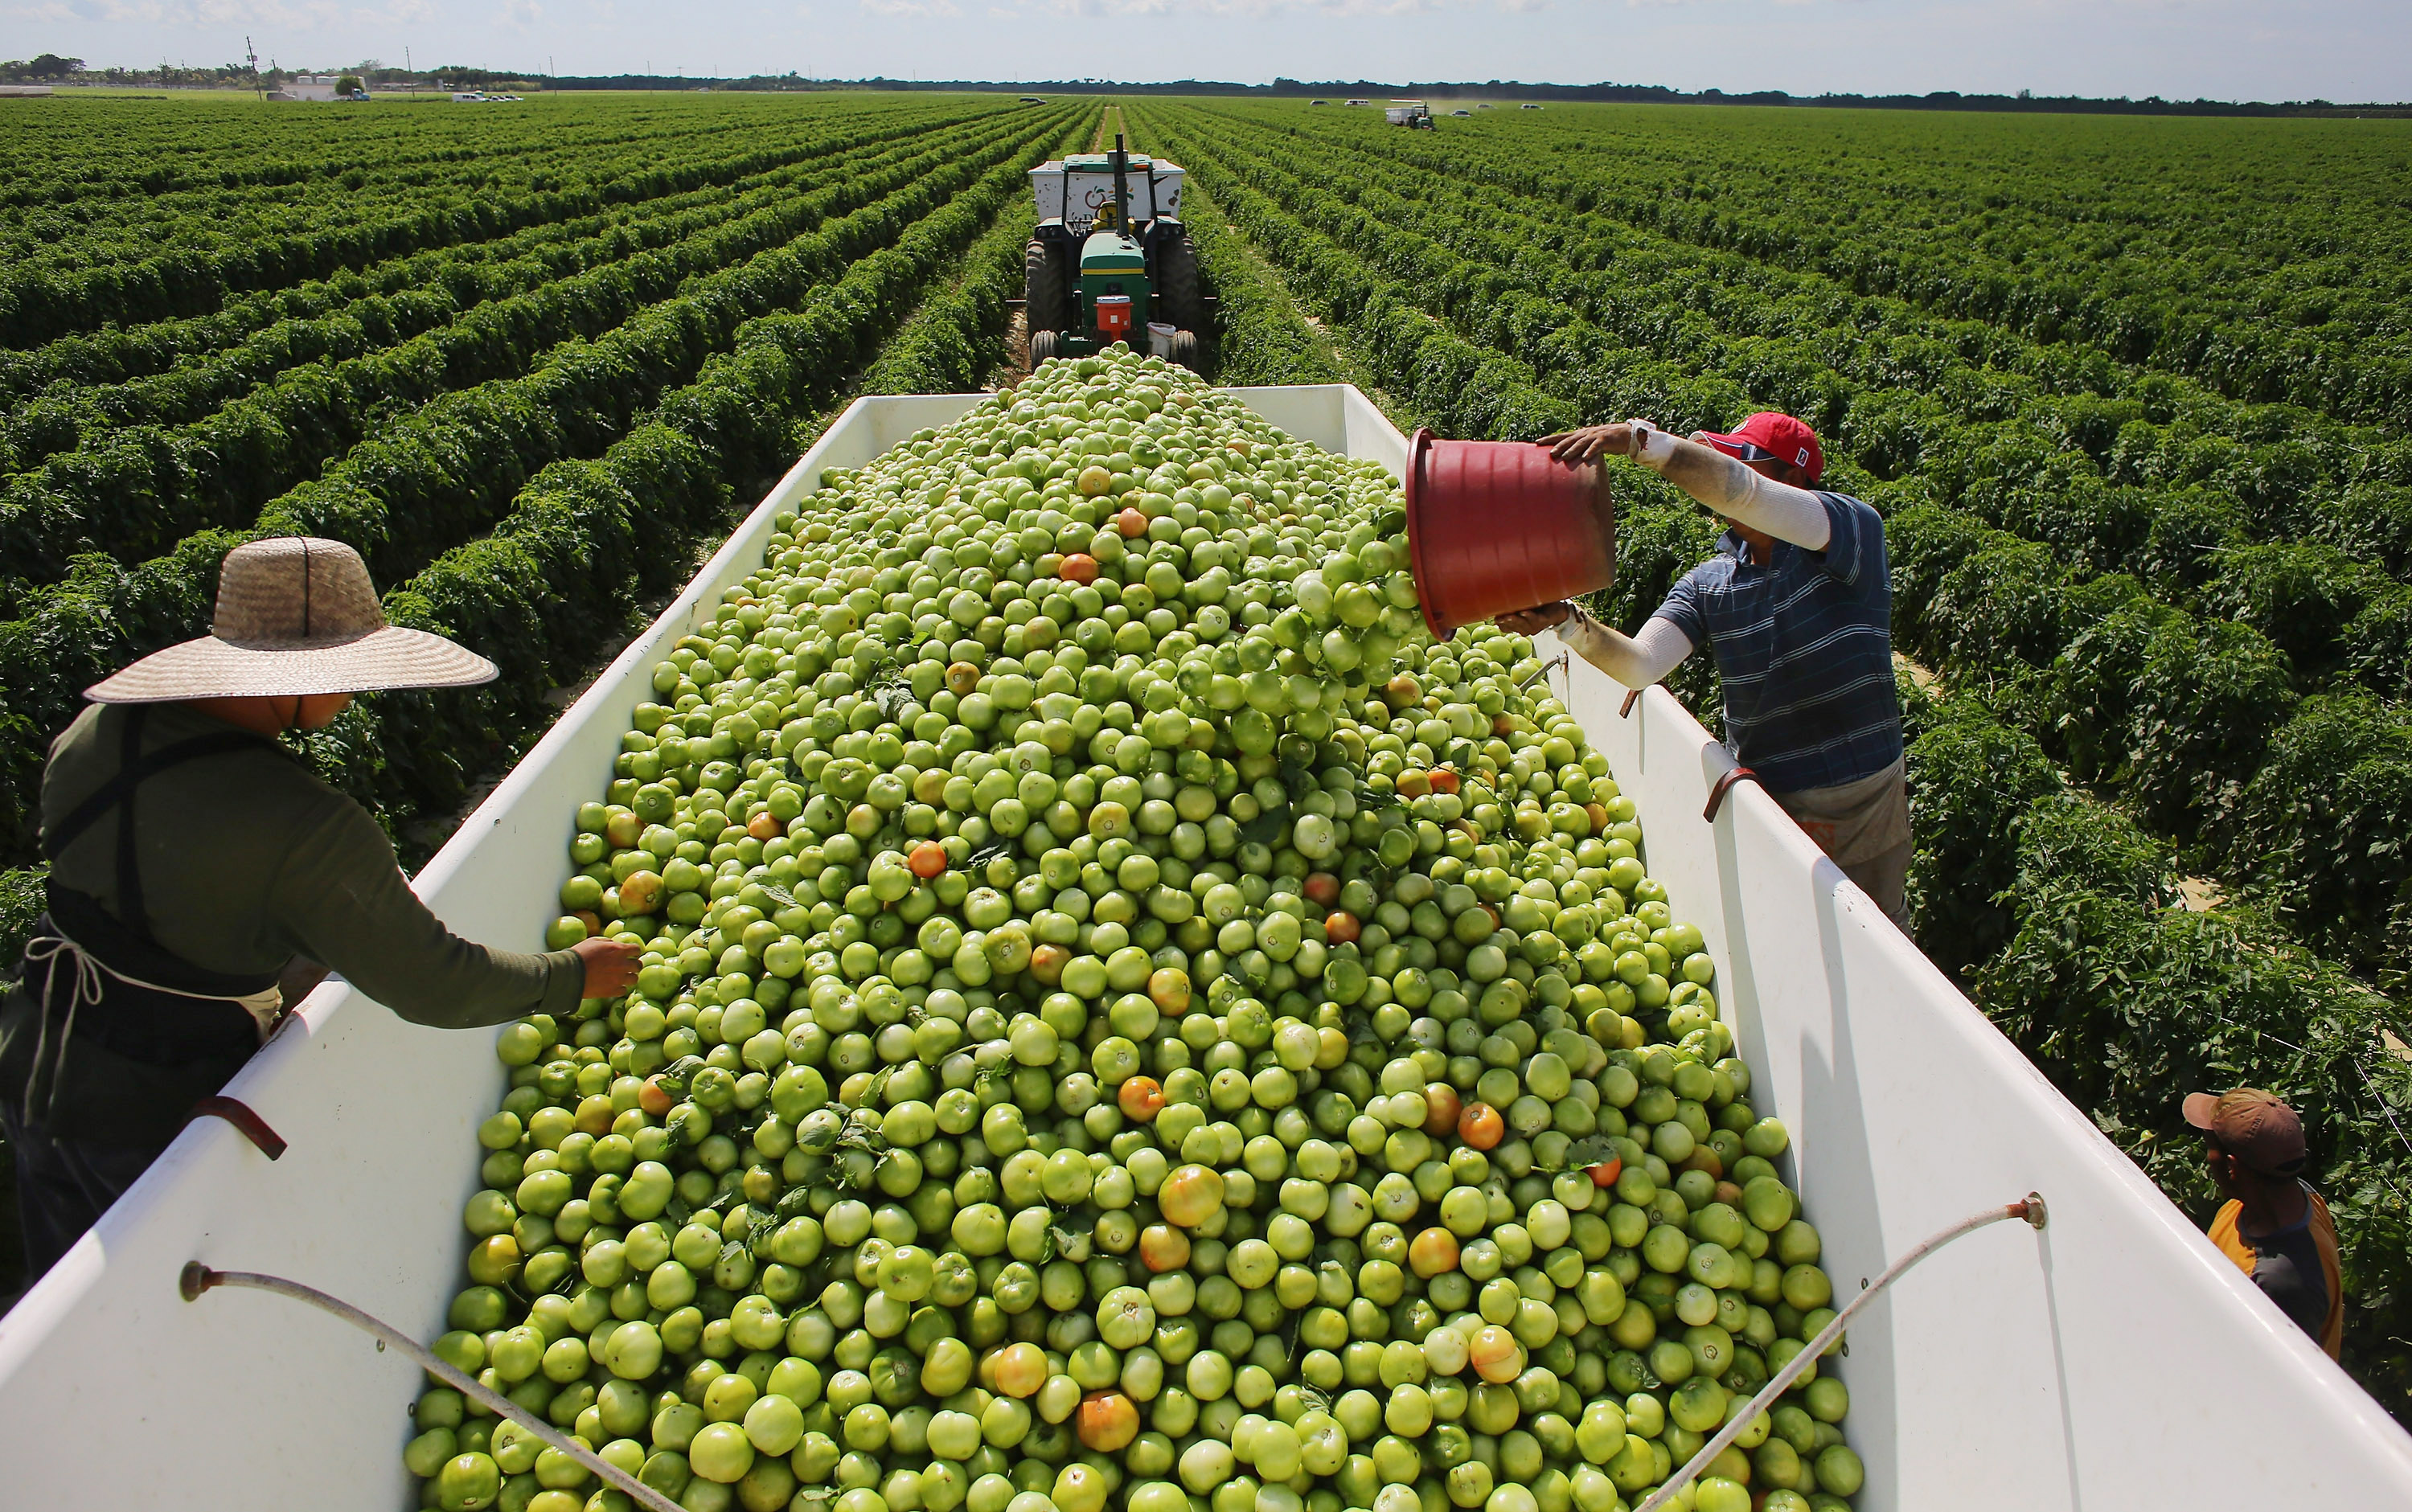 Workers fill a trailer with tomatoes, in Florida, on Feb. 6, 2013. (Joe Raedle—Getty Images)